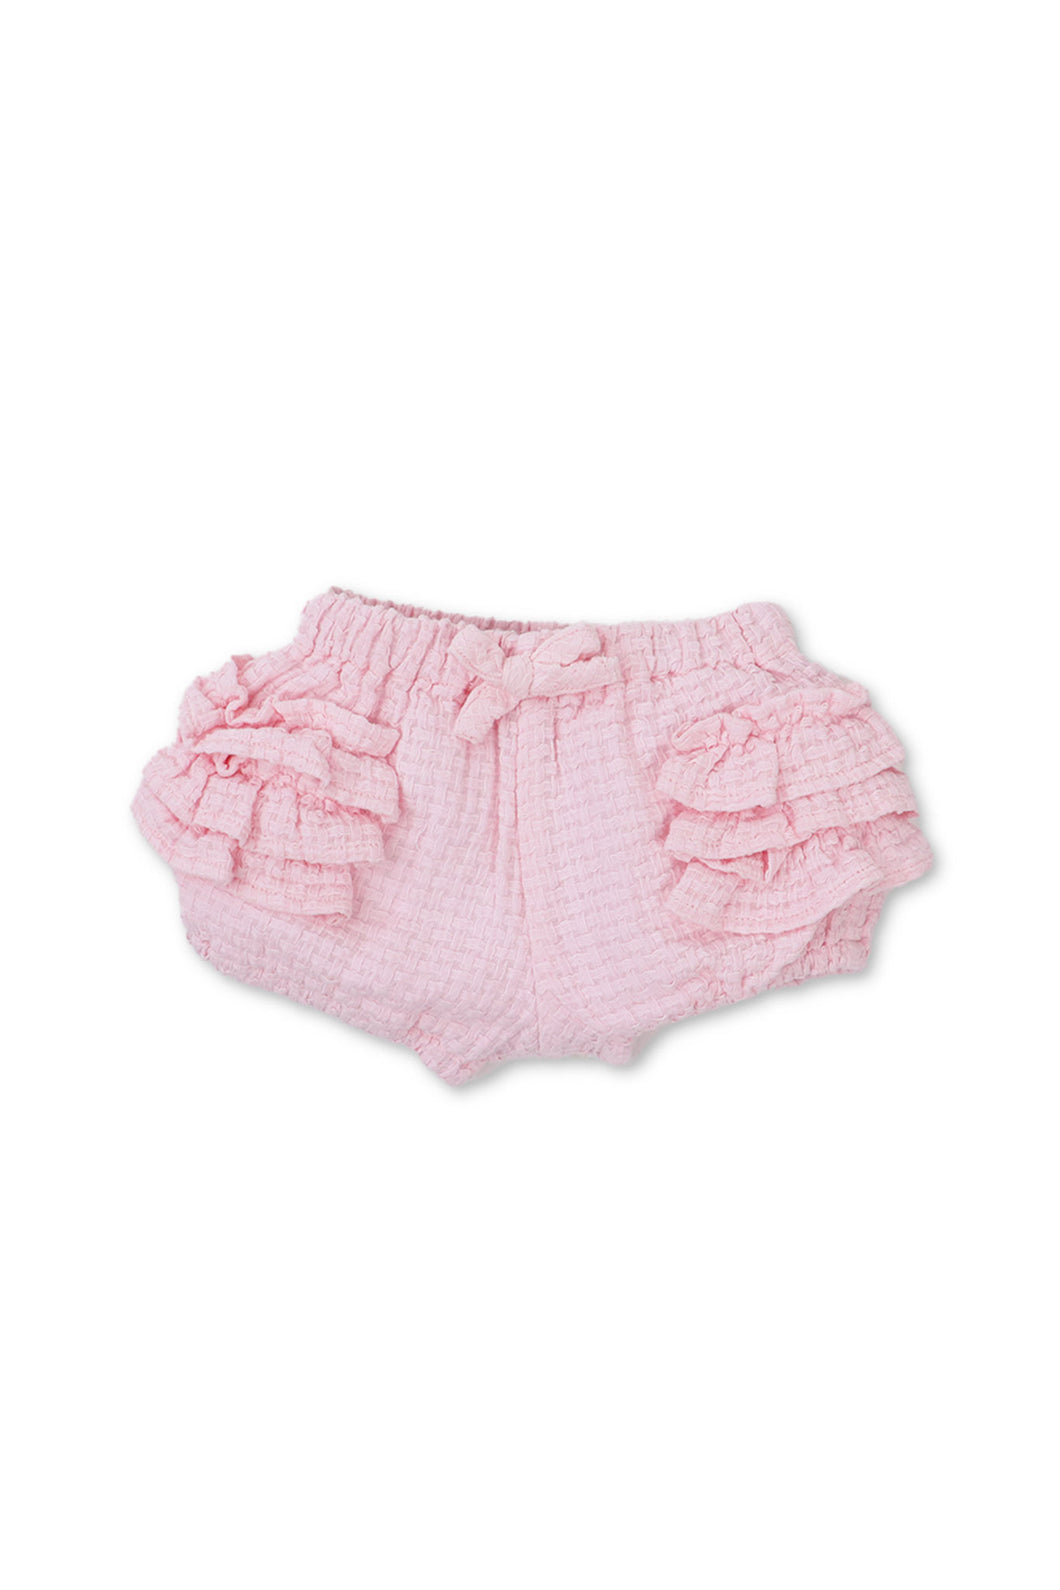 Gingersnaps Muslin Bloomers with Ruffles